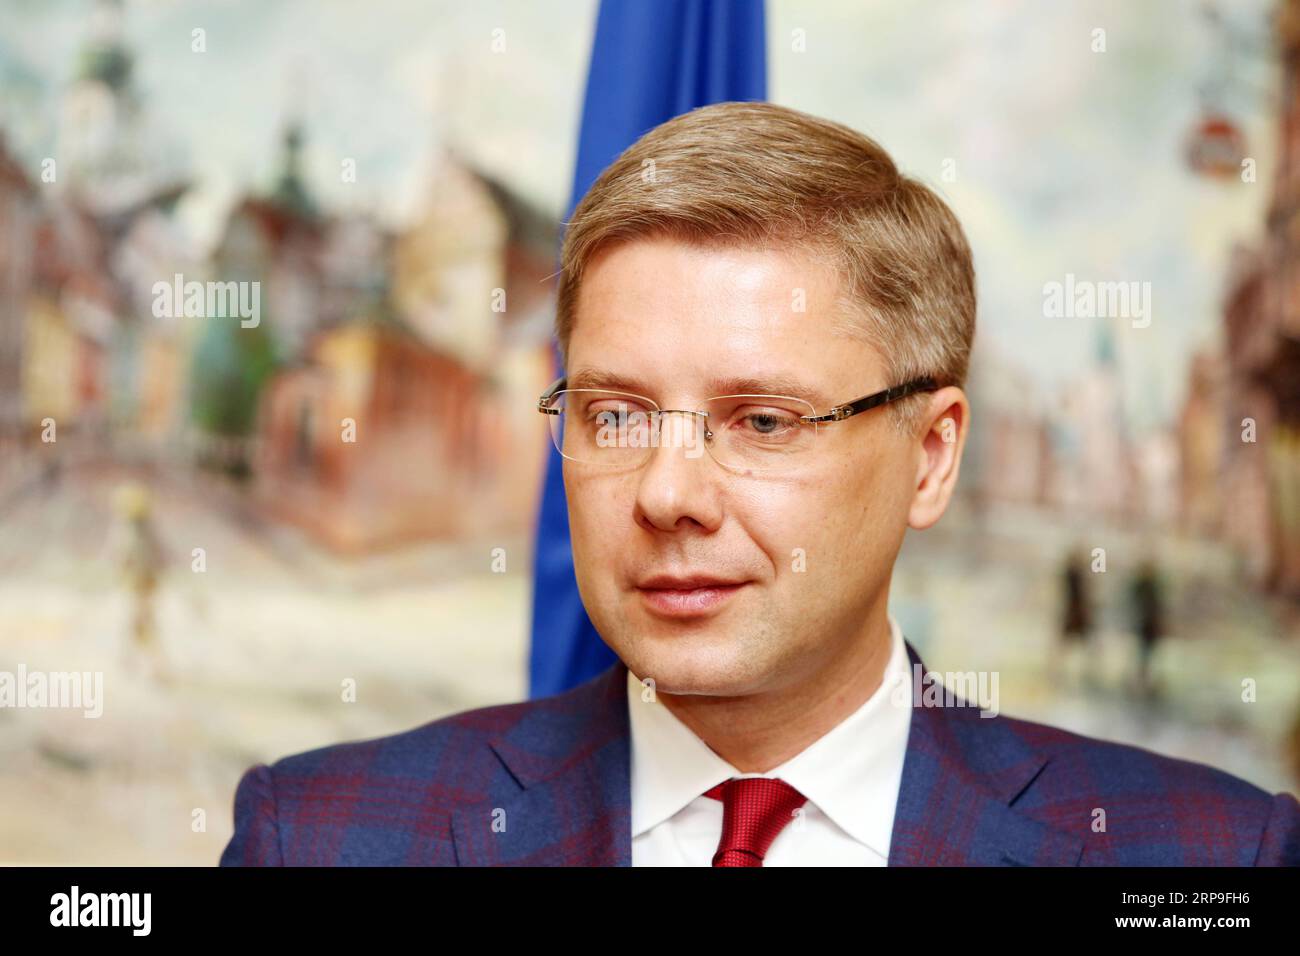 (190405) -- RIGA, April 5, 2019 (Xinhua) -- Nils Usakovs reacts during a press briefing after his dismissal from the post of Riga mayor in Riga, capital of Latvia, April 5, 2019. Latvian Environmental Protection and Regional Development Minister Juris Puce sacked Riga mayor Nils Usakovs on Friday, blaming him for a failure to prevent serious illegalities in the Latvian capital s municipal transport company. The mayor lost his job for not performing his office duties as prescribed by law and for several violations, according to the minister s decree published in the official newspaper Latvijas Stock Photo